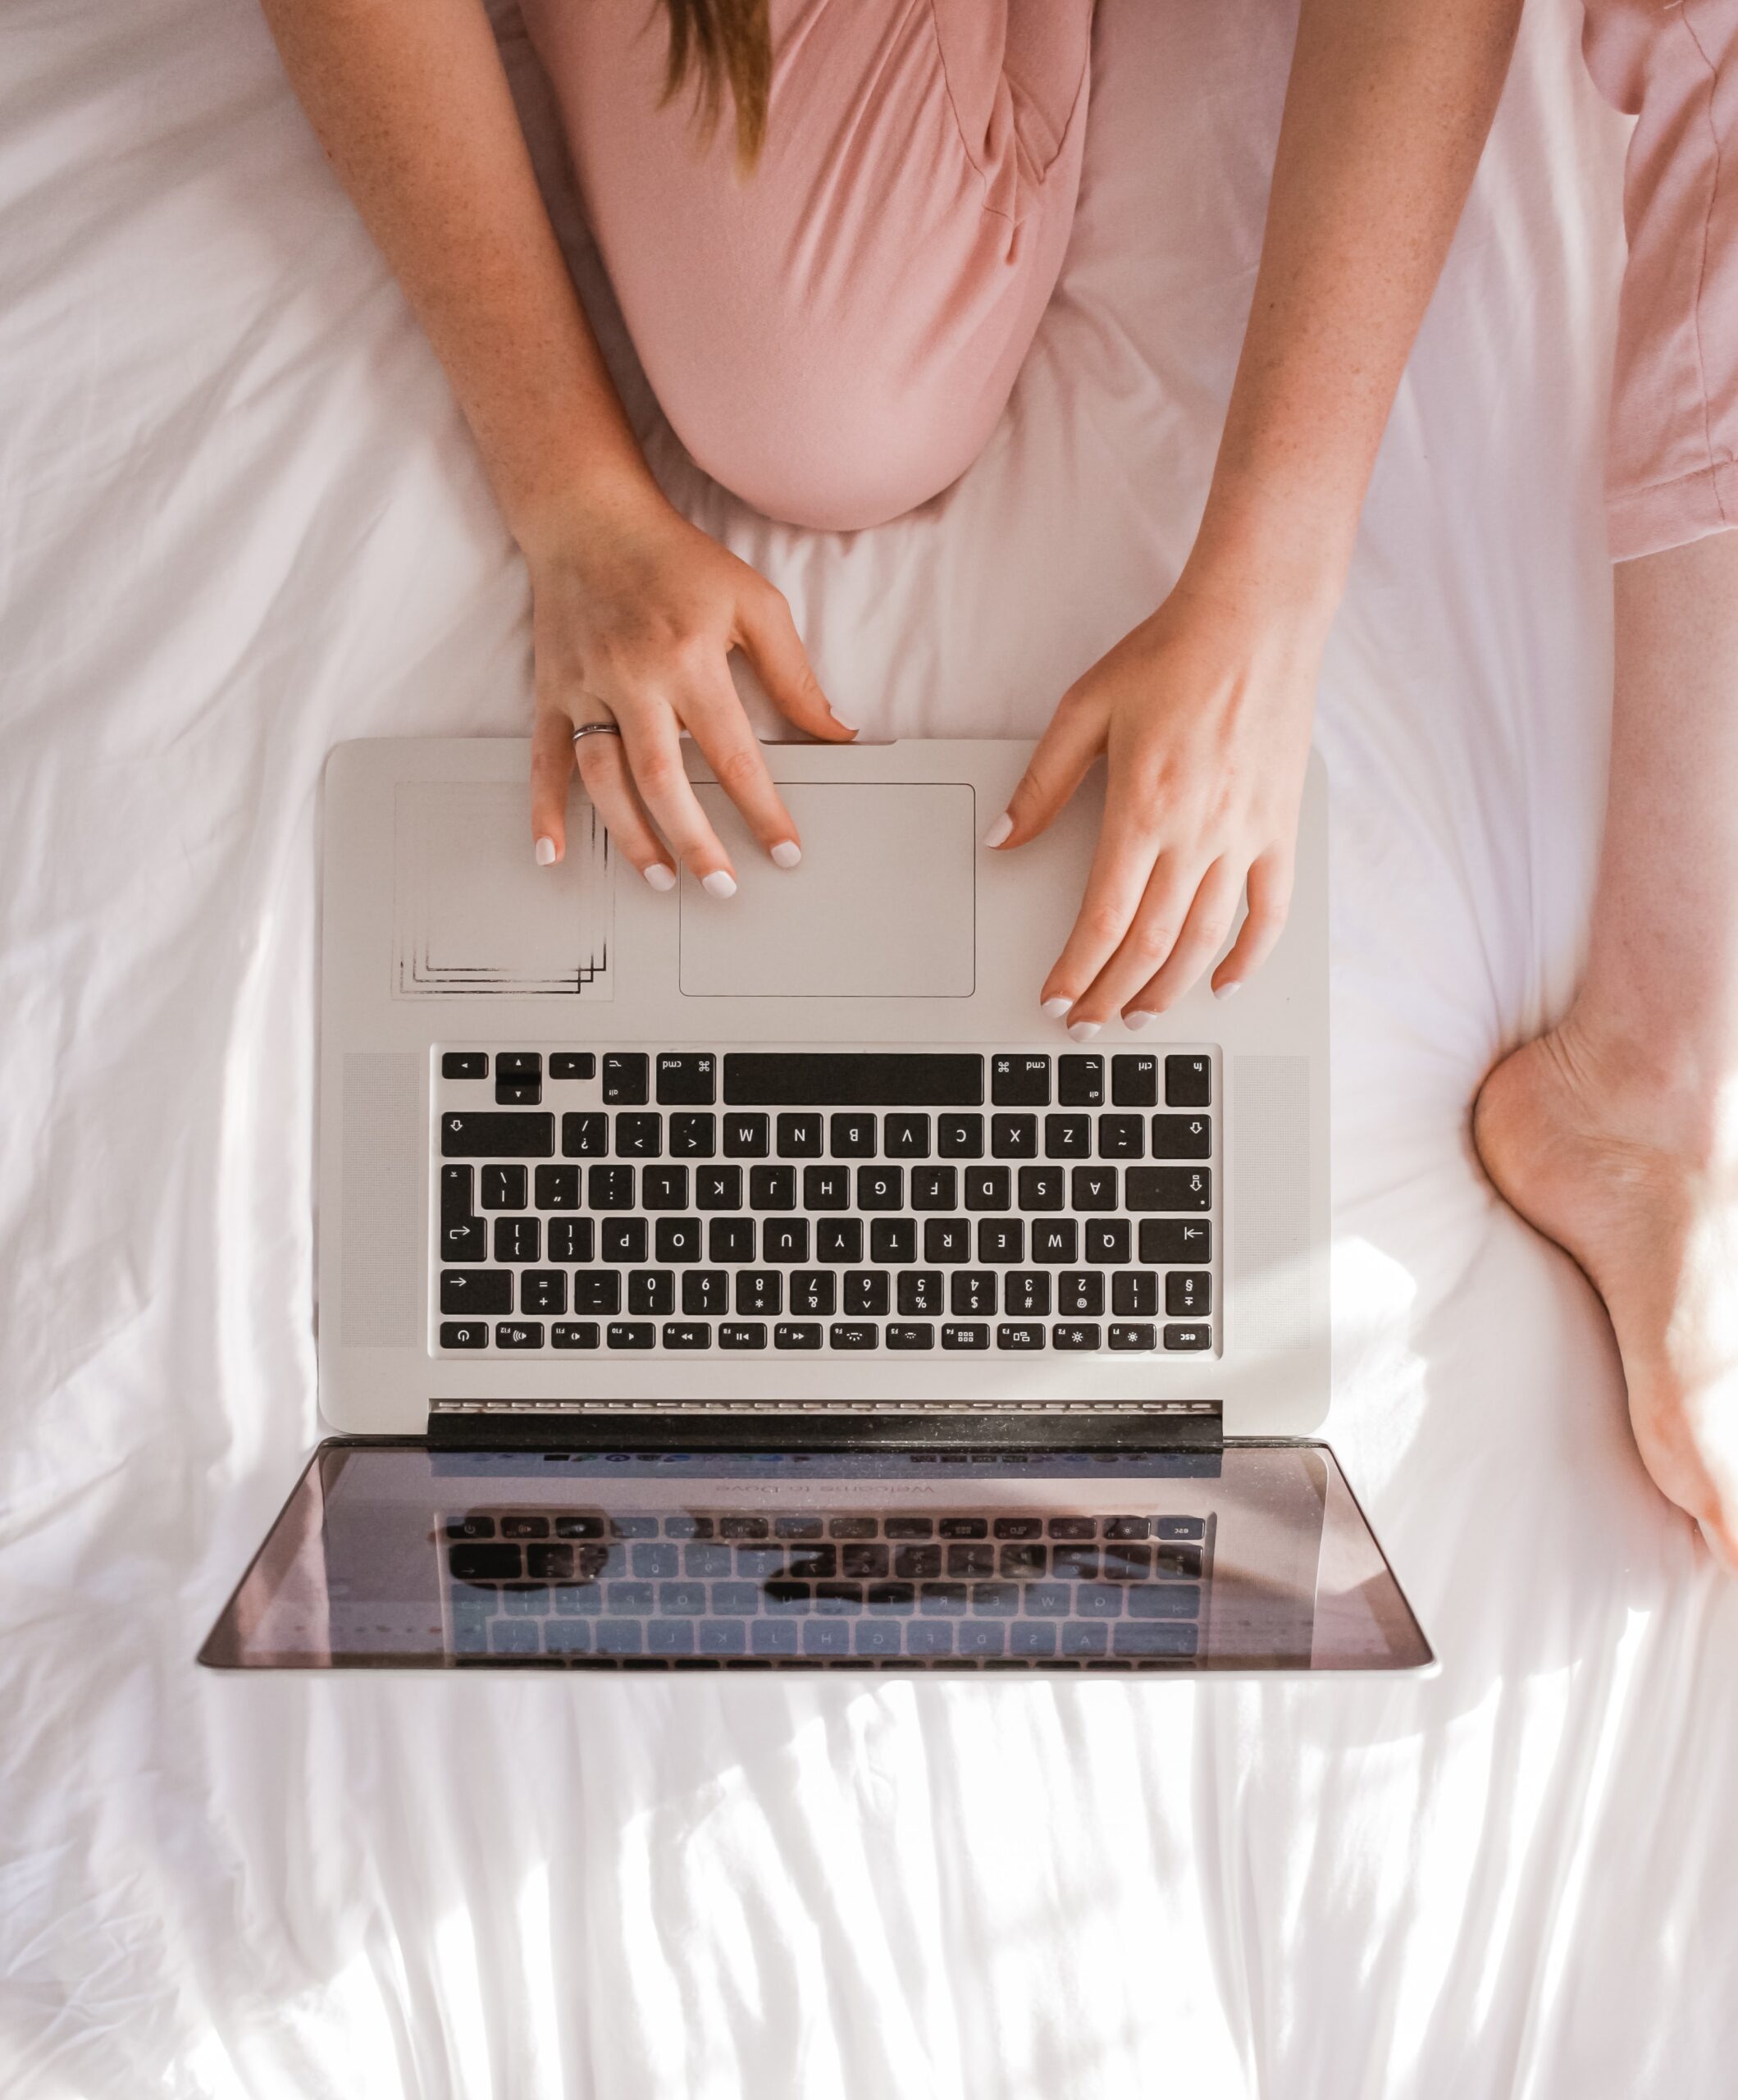 In an article about student essays woman on bed with a laptop